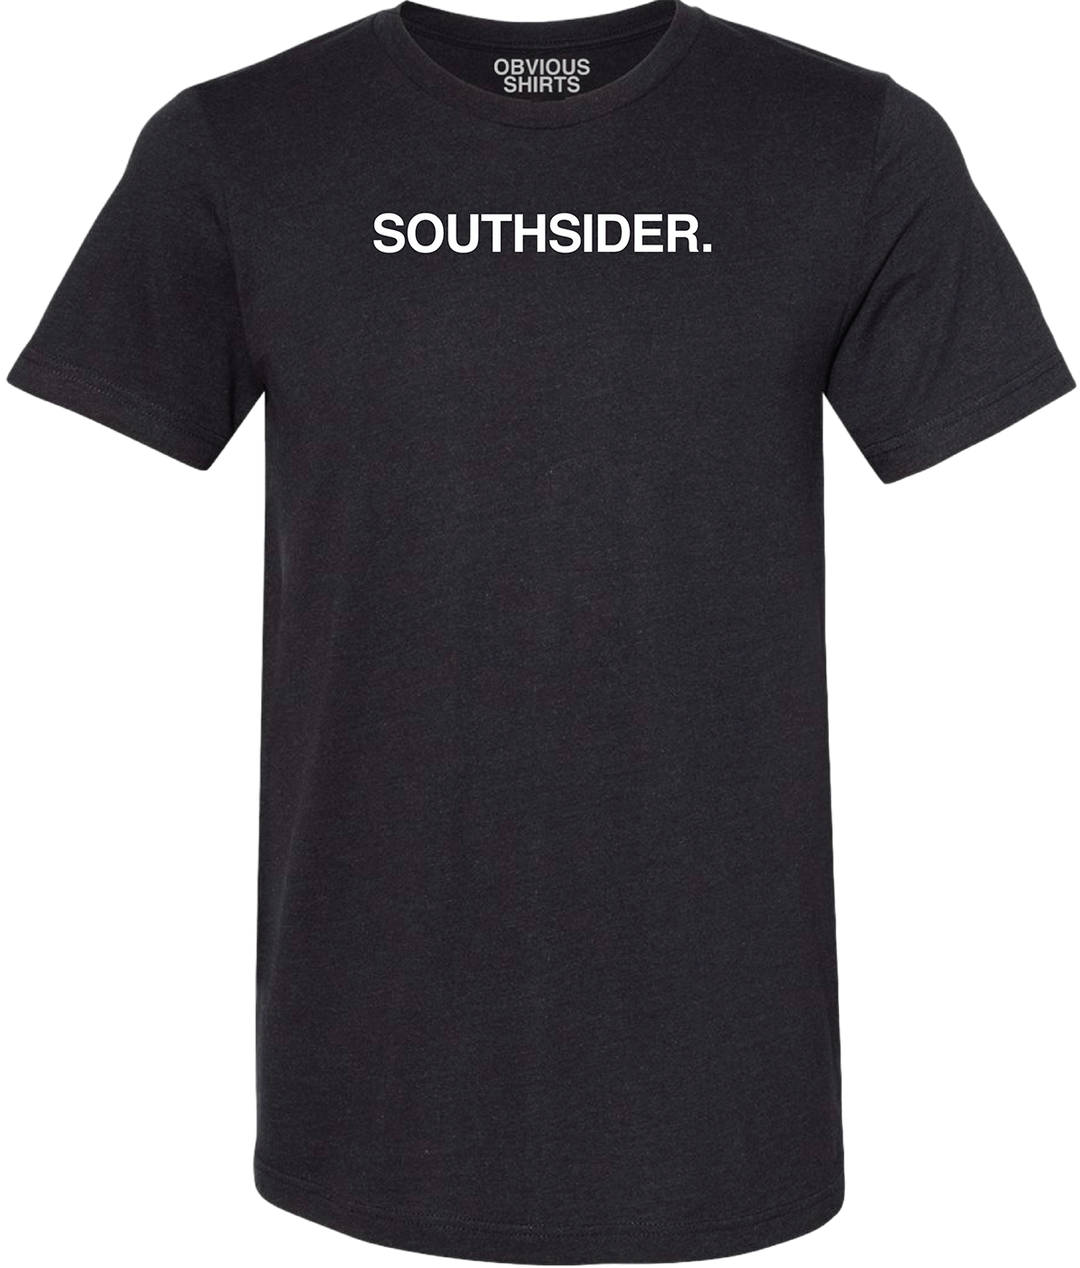 SOUTHSIDER. - OBVIOUS SHIRTS.